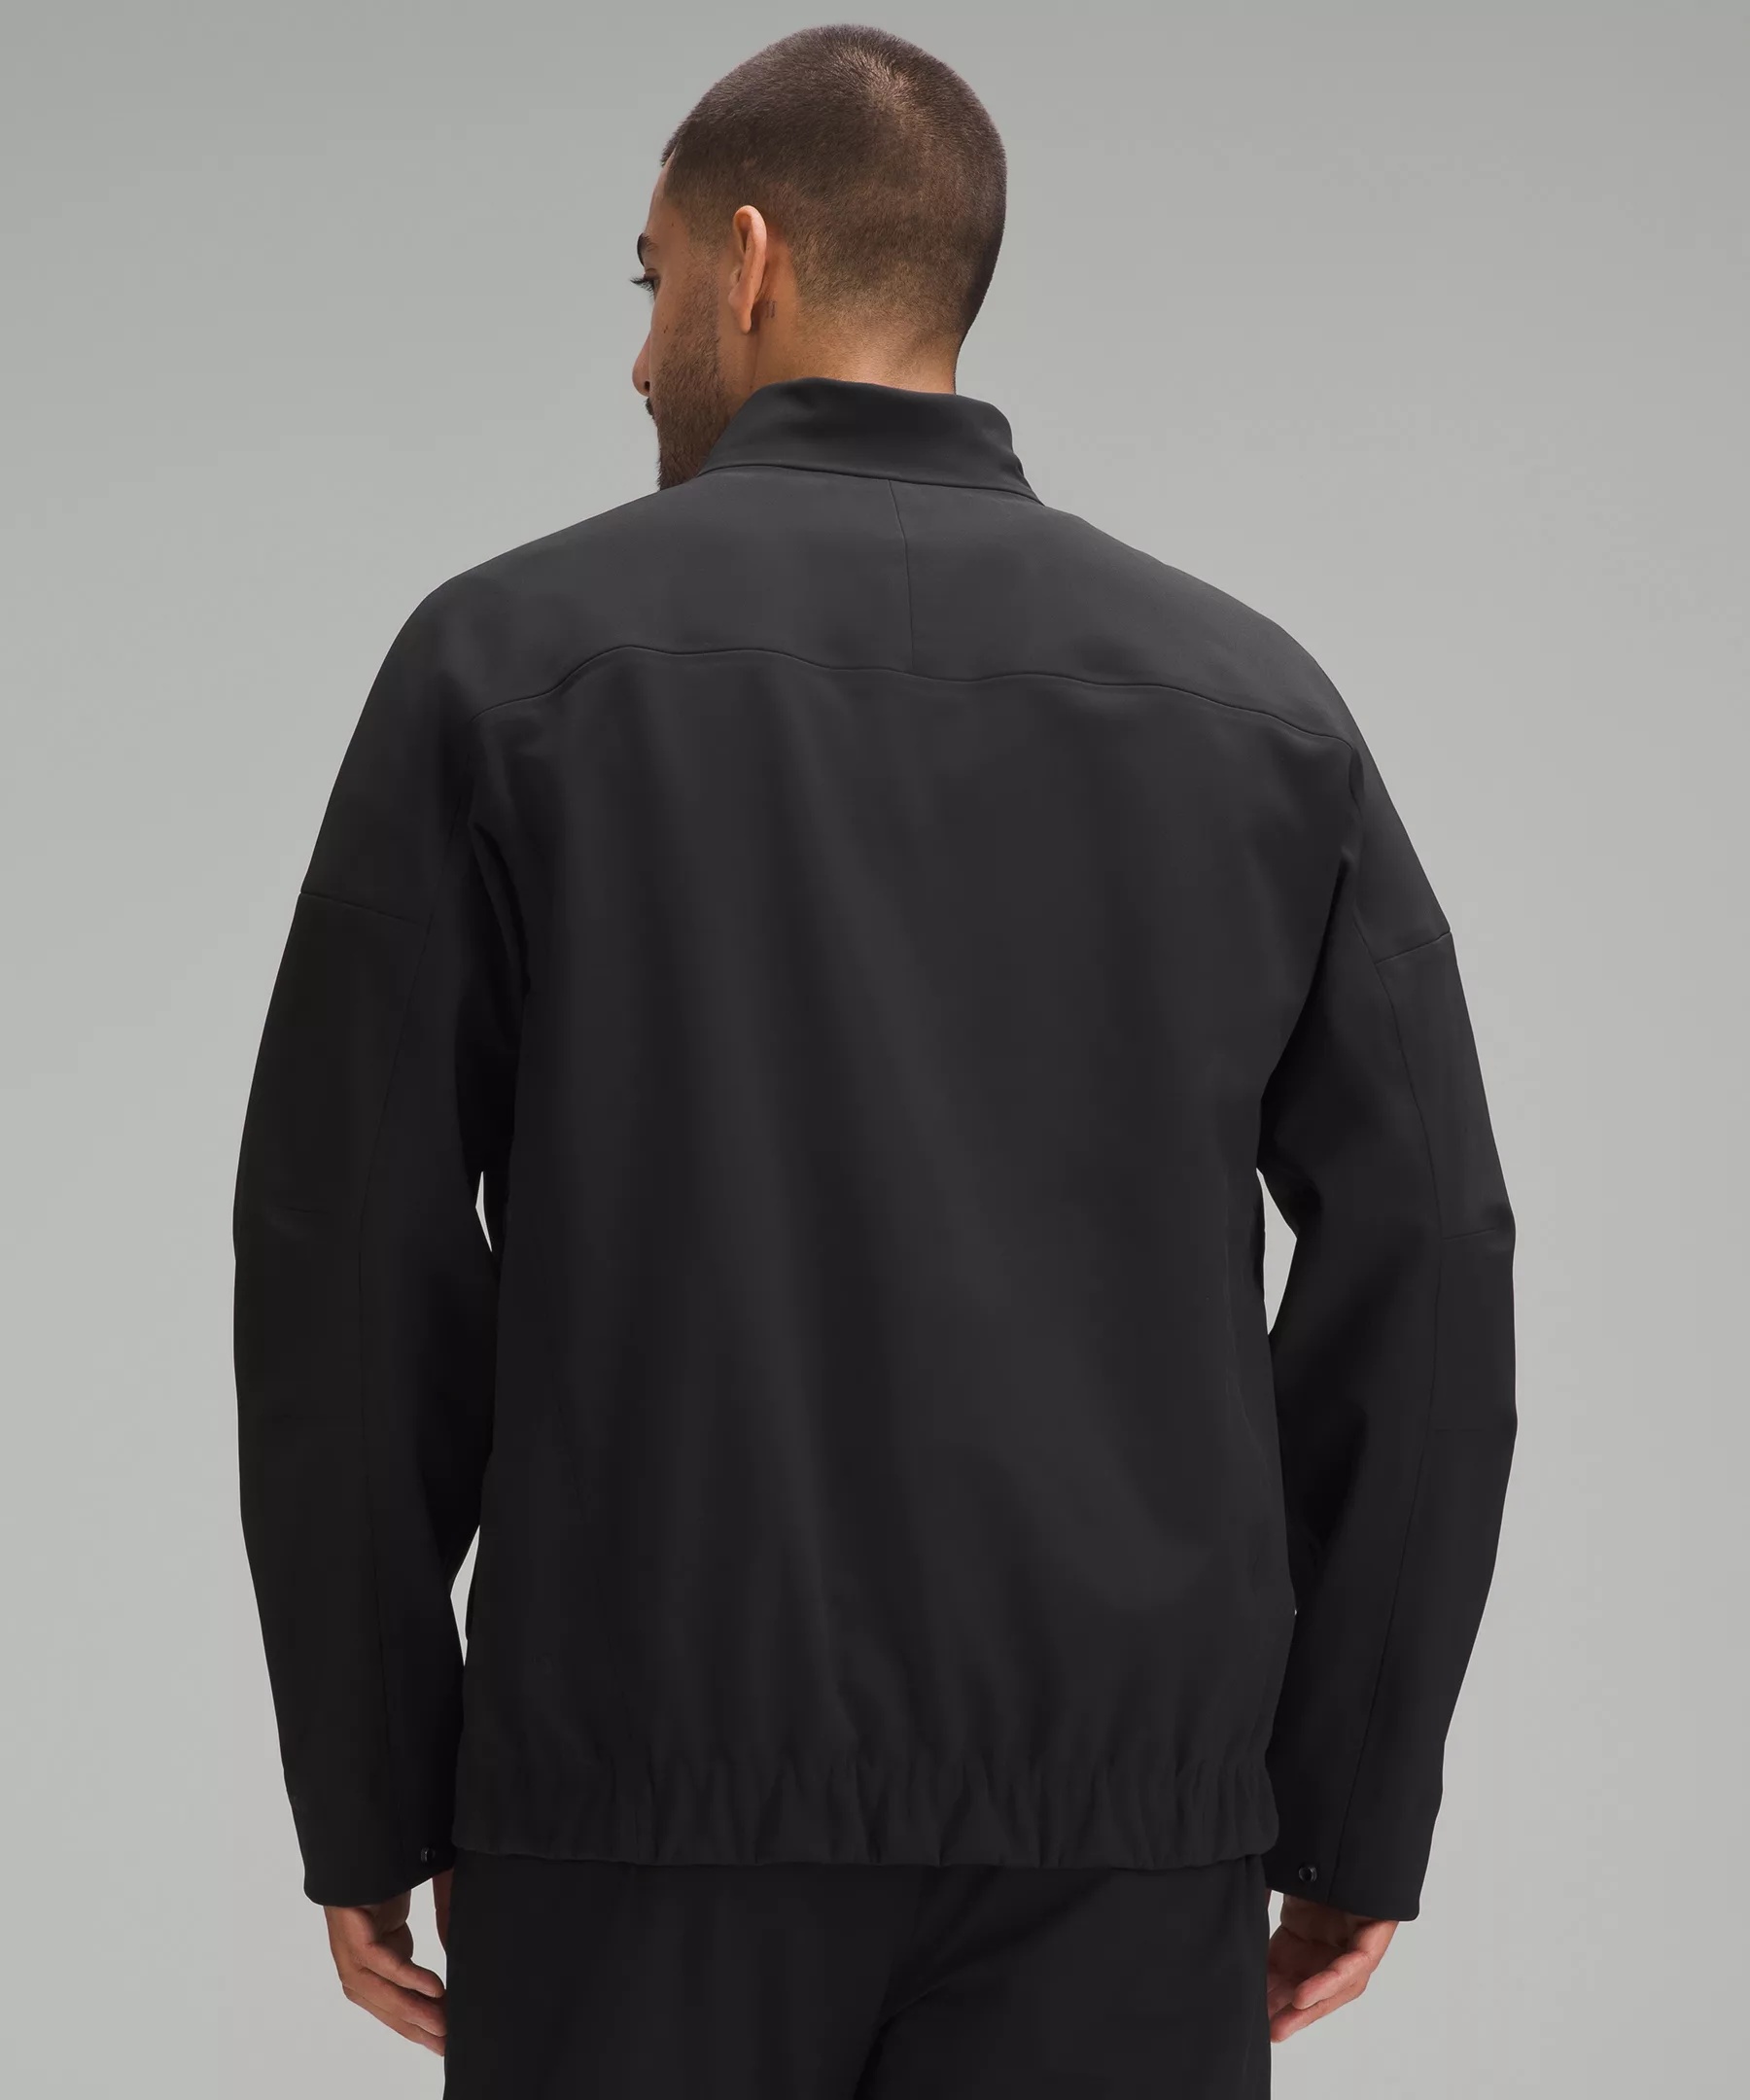 RepelShell Relaxed-Fit Jacket - 3